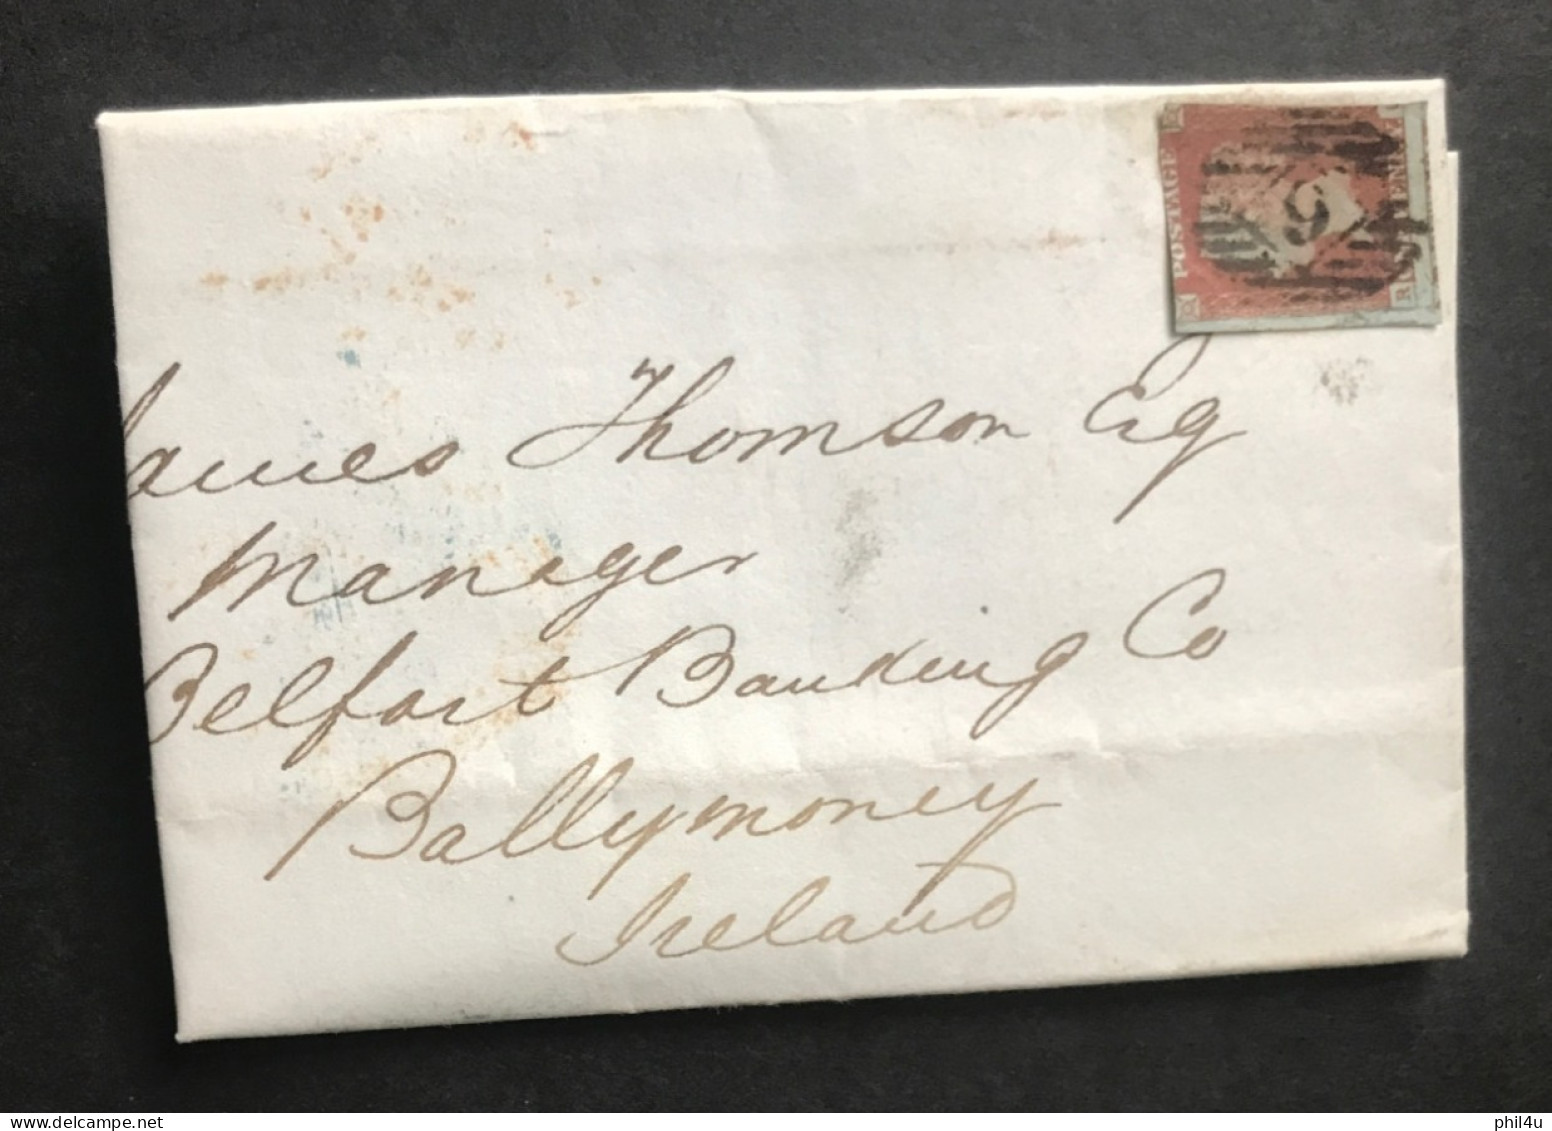 1848 GB Penny Imperf Stamp Post Mark 6 Square Penny Post Mark In Red Letter Banking Bellymoney Ireland See Scan - Covers & Documents